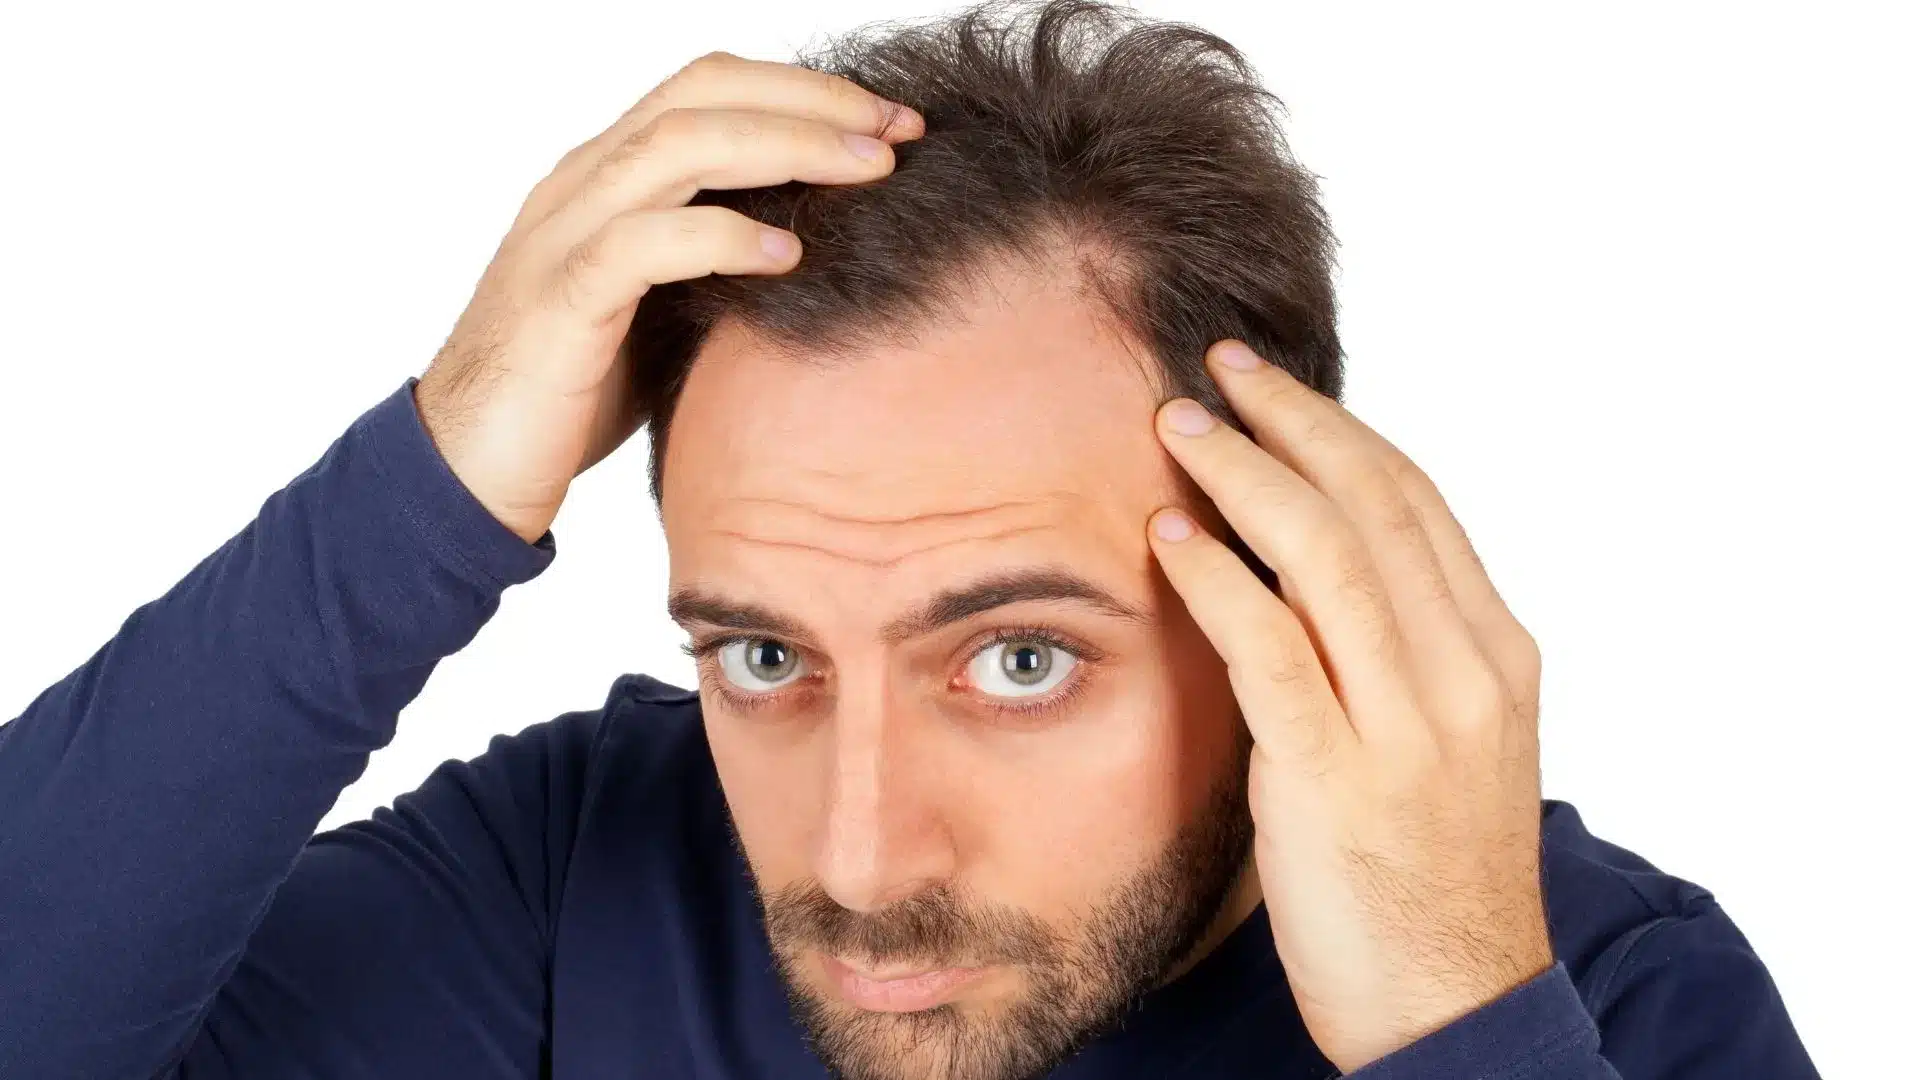 Where to Get Hair Transplant in Turkey?